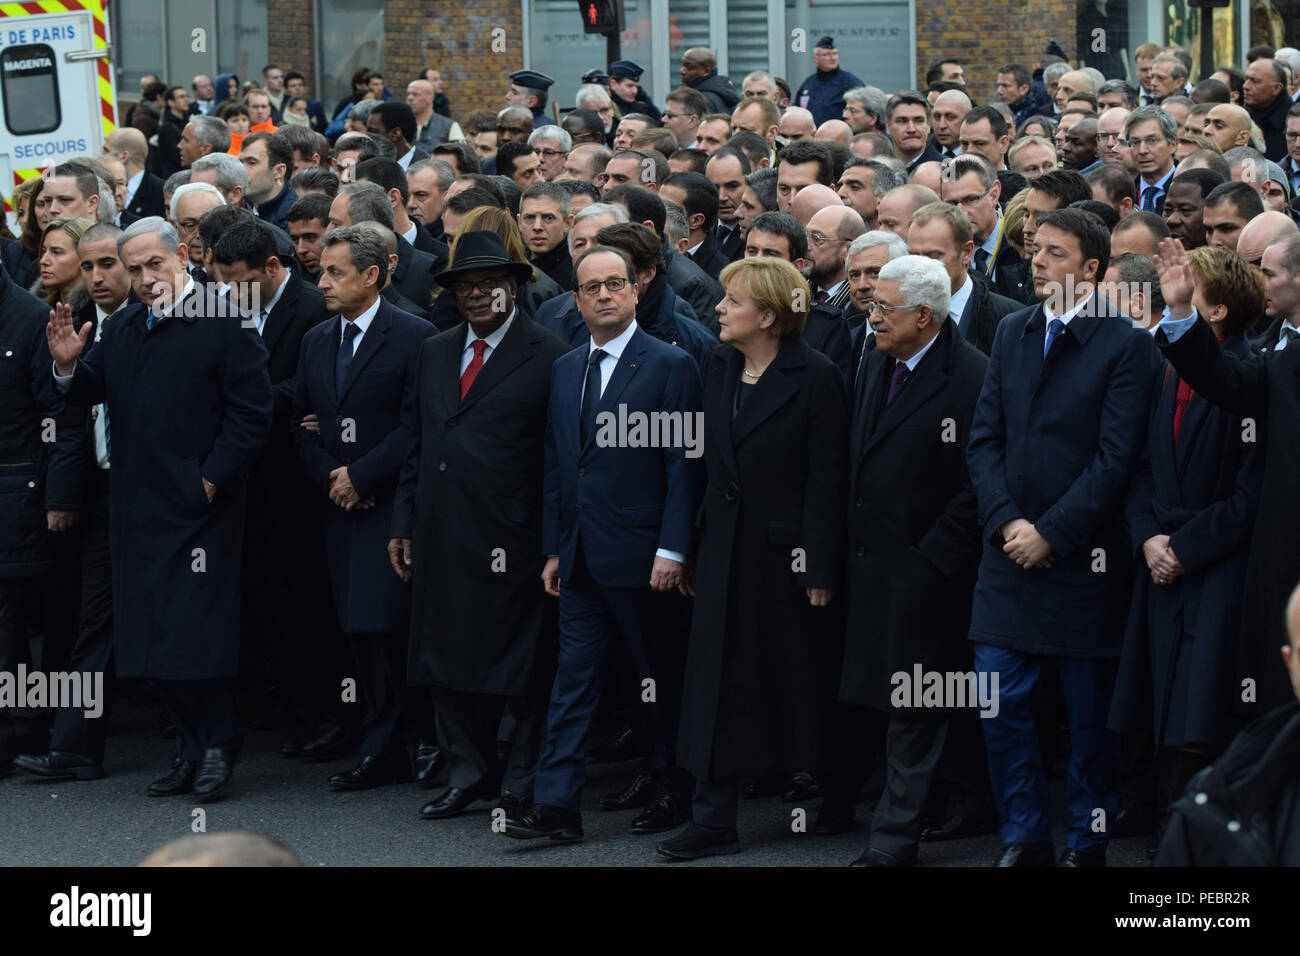 January 11, 2015 - Paris, France:  (L-R) Israeli Prime minister Benjamin Netanyahu, former French president Nicolas Sarkozy, Malian president Ibrahim Boubacar Keita, French President Francois Hollande, German chancellor Angela Merkel, Palestinian president Mahmoud Abbas and Italian Prime minister Matteo Renzi take part in a march to support Freedom of expression and protest against terrorism in the French capital after three days of terror left 17 people dead. Four million people demonstrated across the country in a 'Marche Republicaine' (Republican March) celebrating the nation's unity in fac Stock Photo